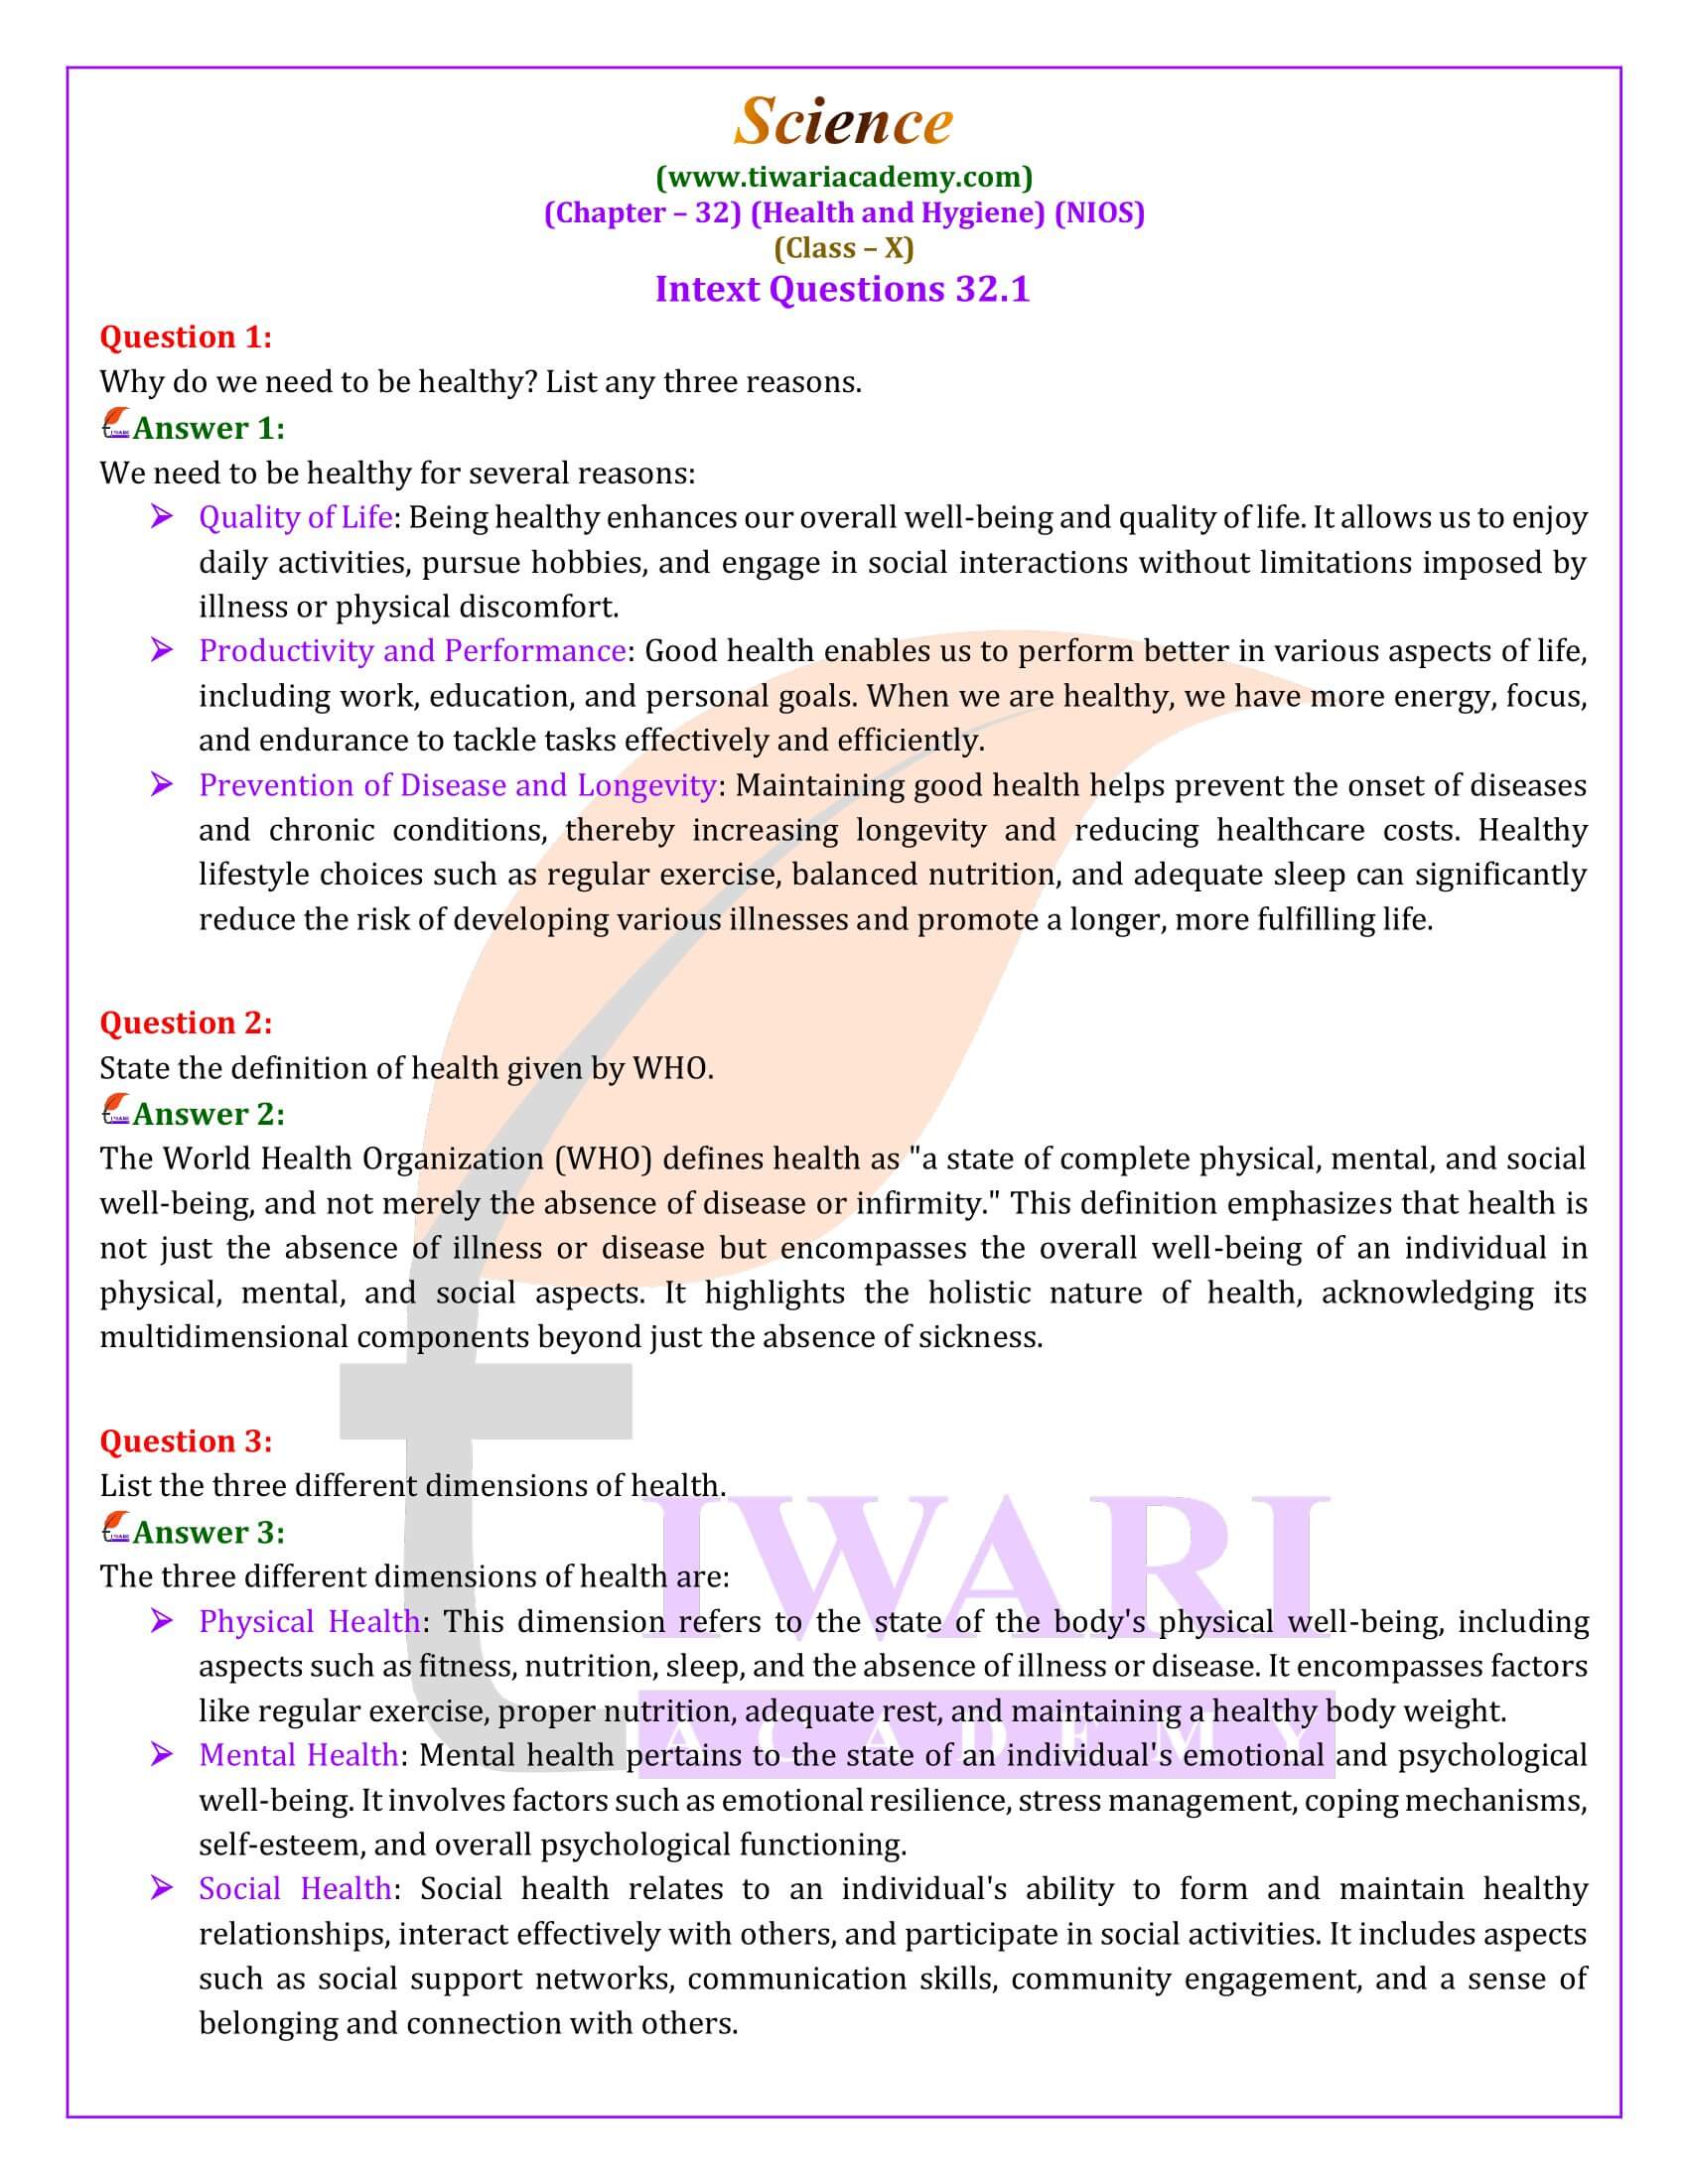 NIOS Class 10 Science Chapter 32 Health and Hygiene Solutions